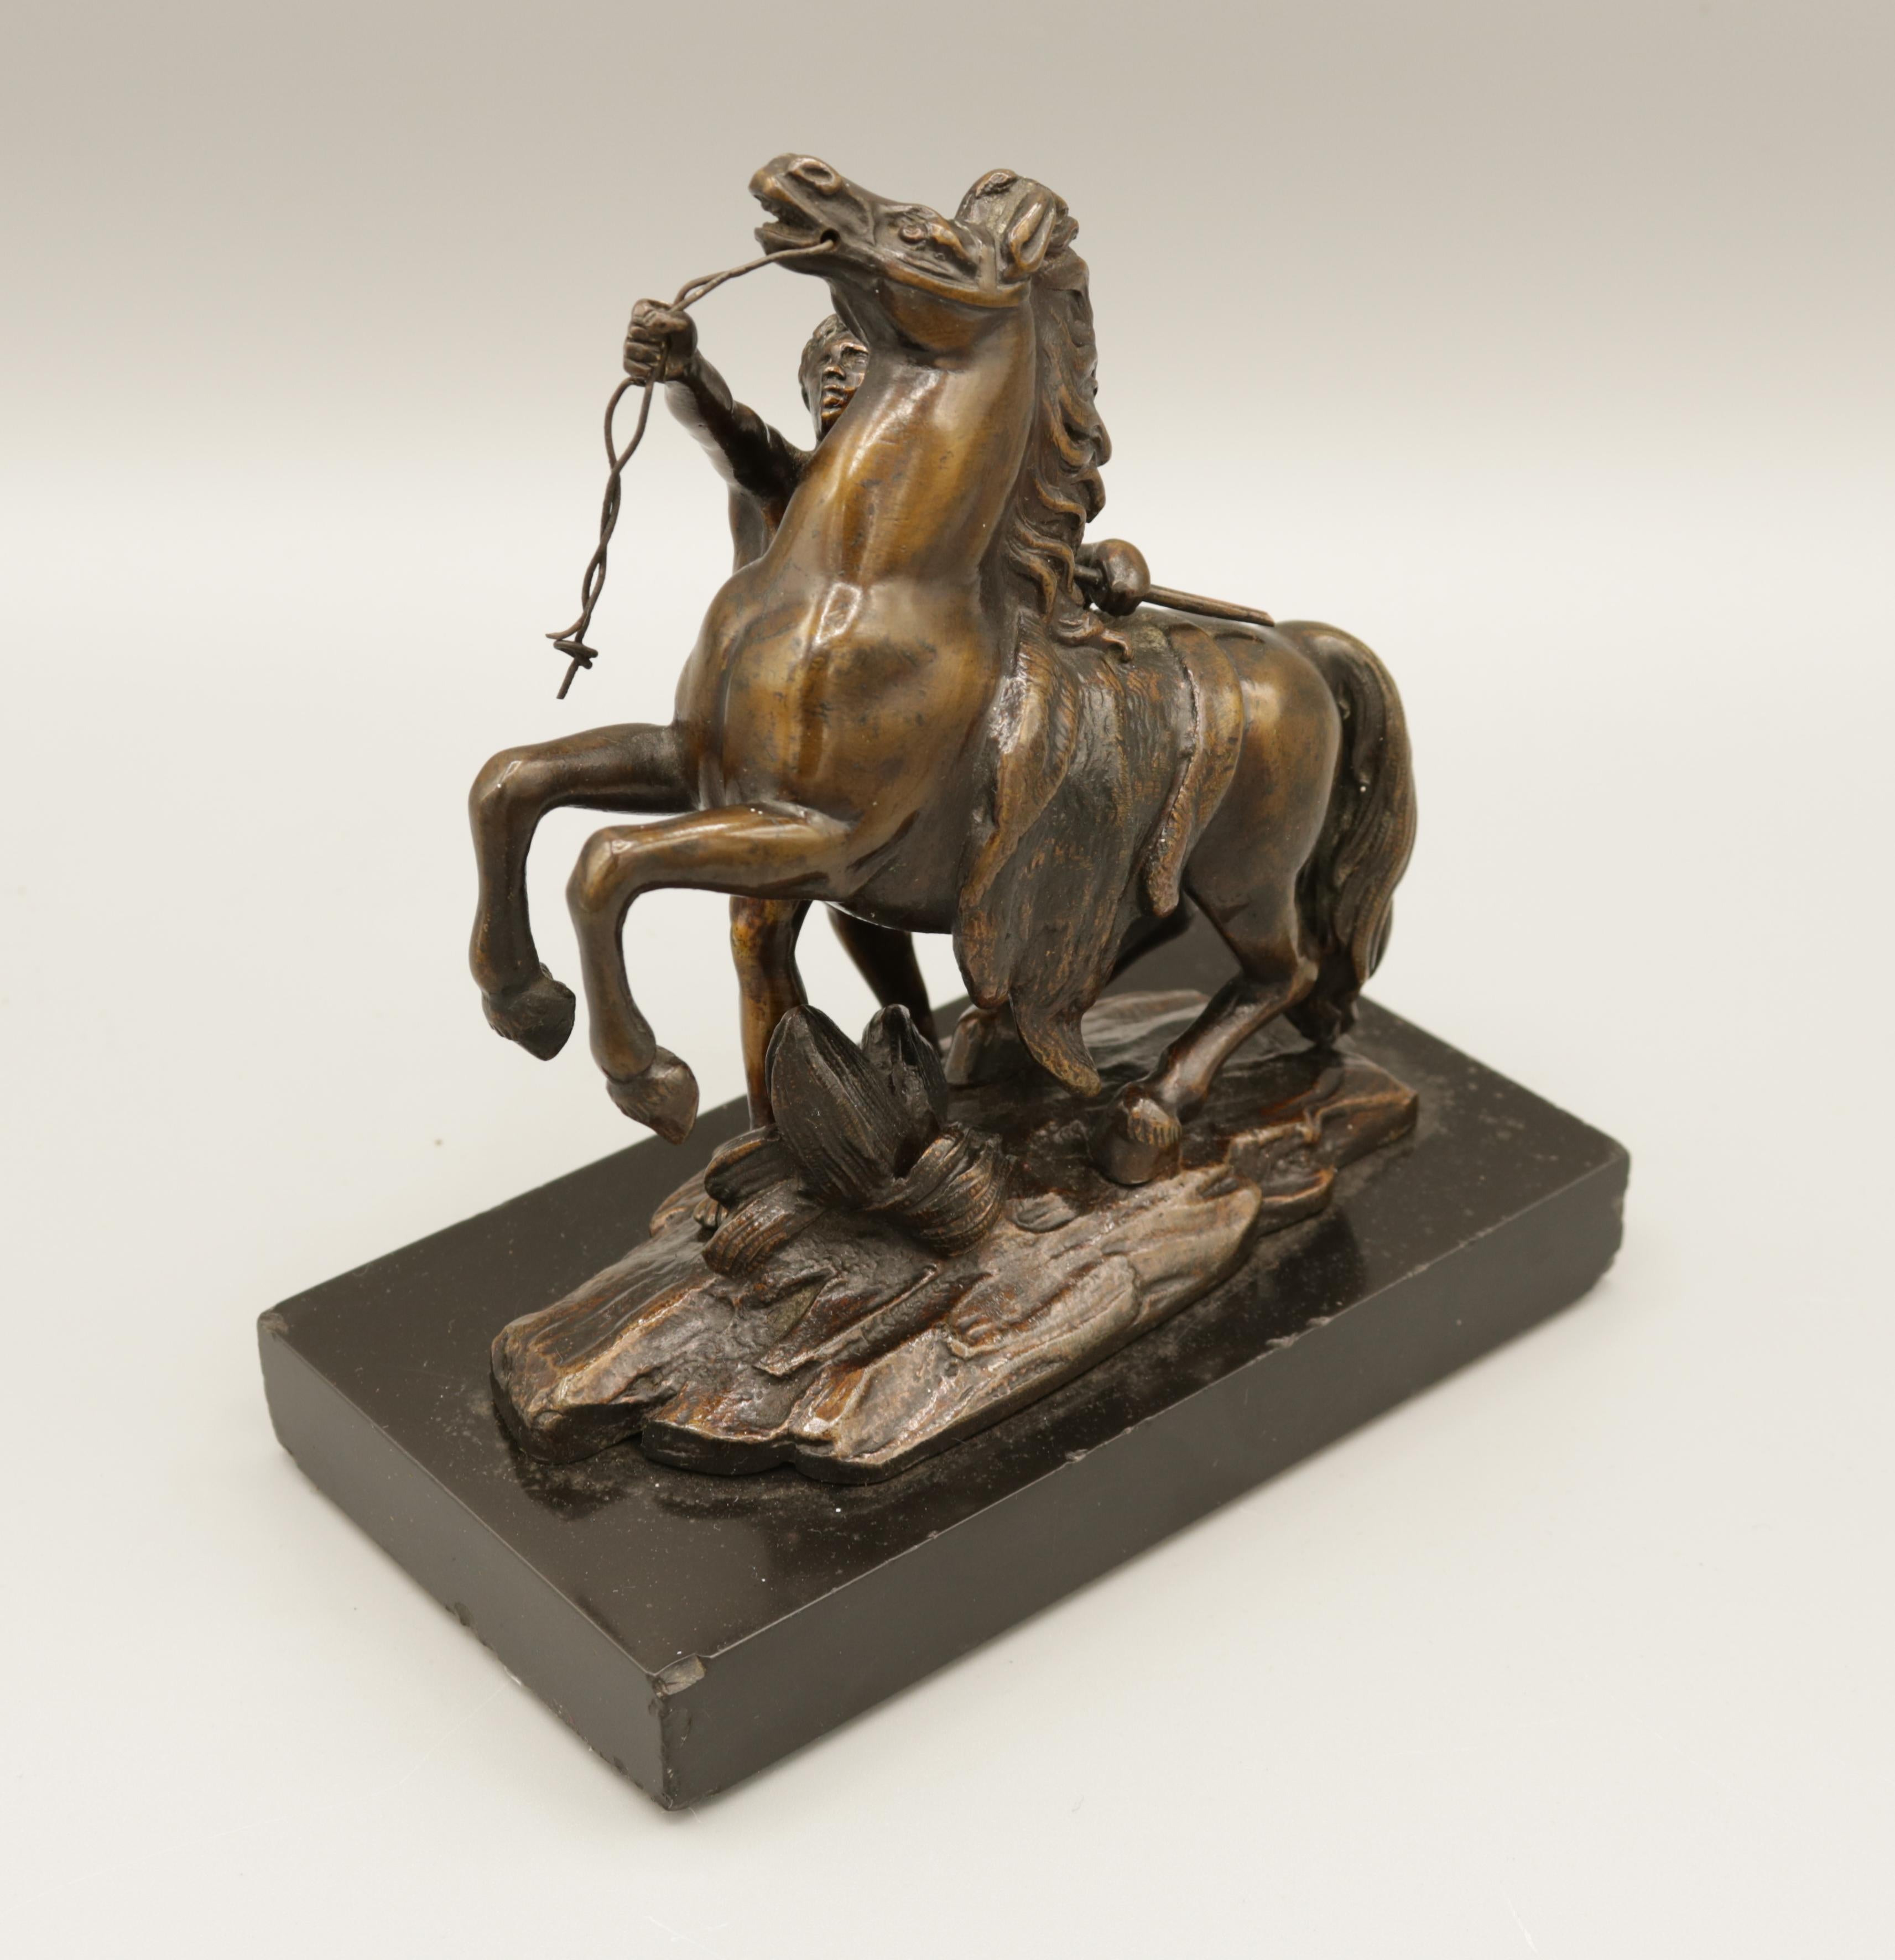 A small pair of fine quality well cast bronze models of the 'Chevaux de Marly', each with a man and rearing horse raised on rectangular plinth bases. The Carrara marble originals commissioned from the workshop of brothers Nicolas & Guillaume Coustou